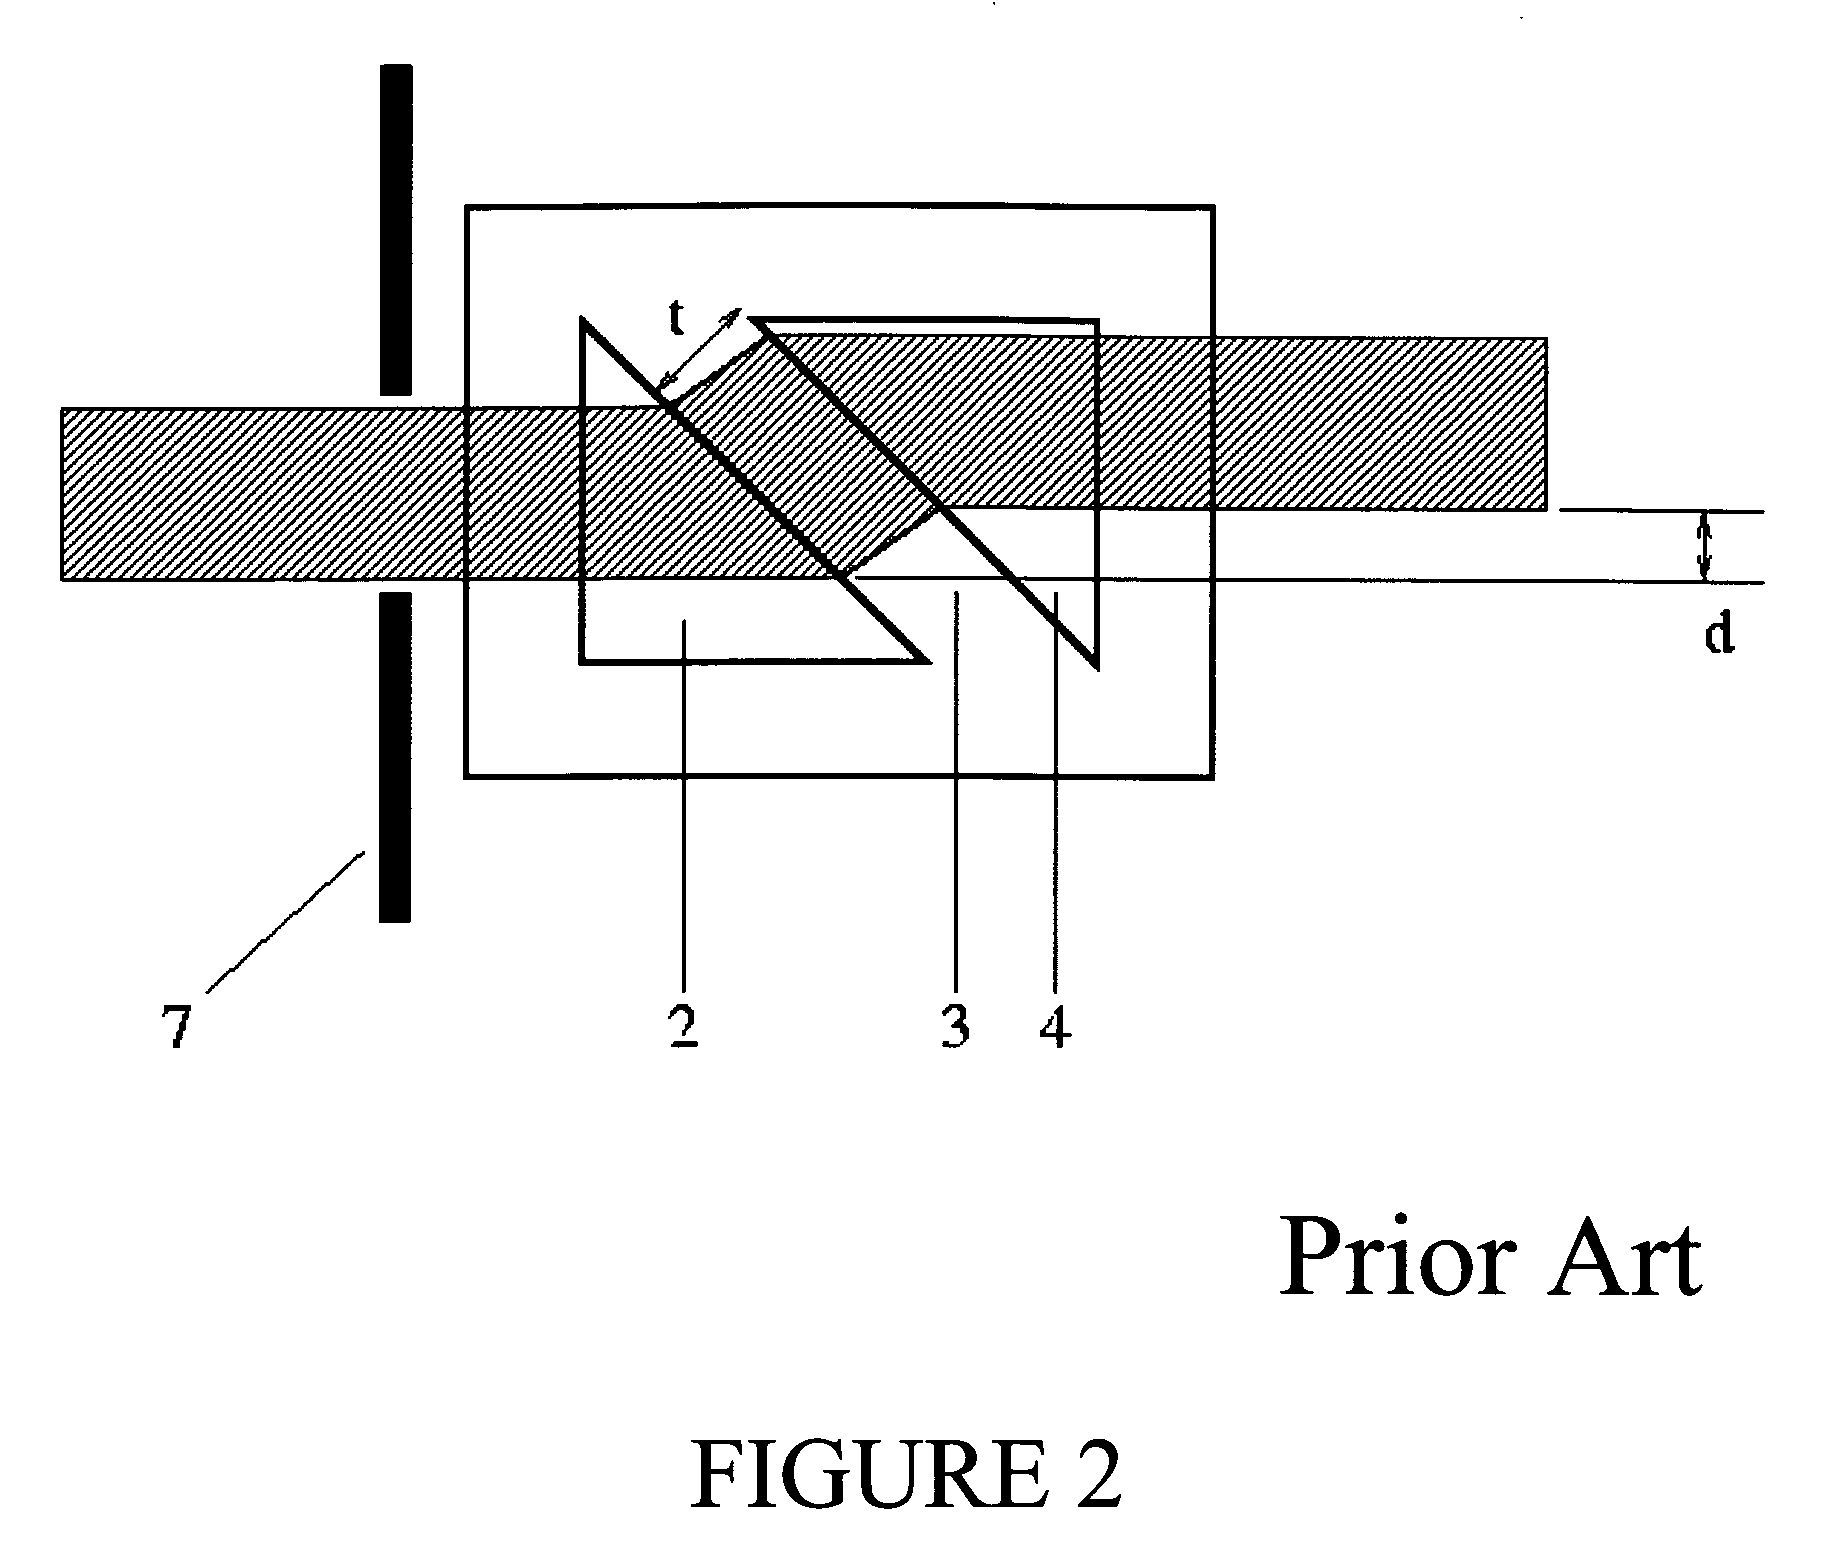 Enhanced sensitivity differential refractometer incorporating a photodetector array